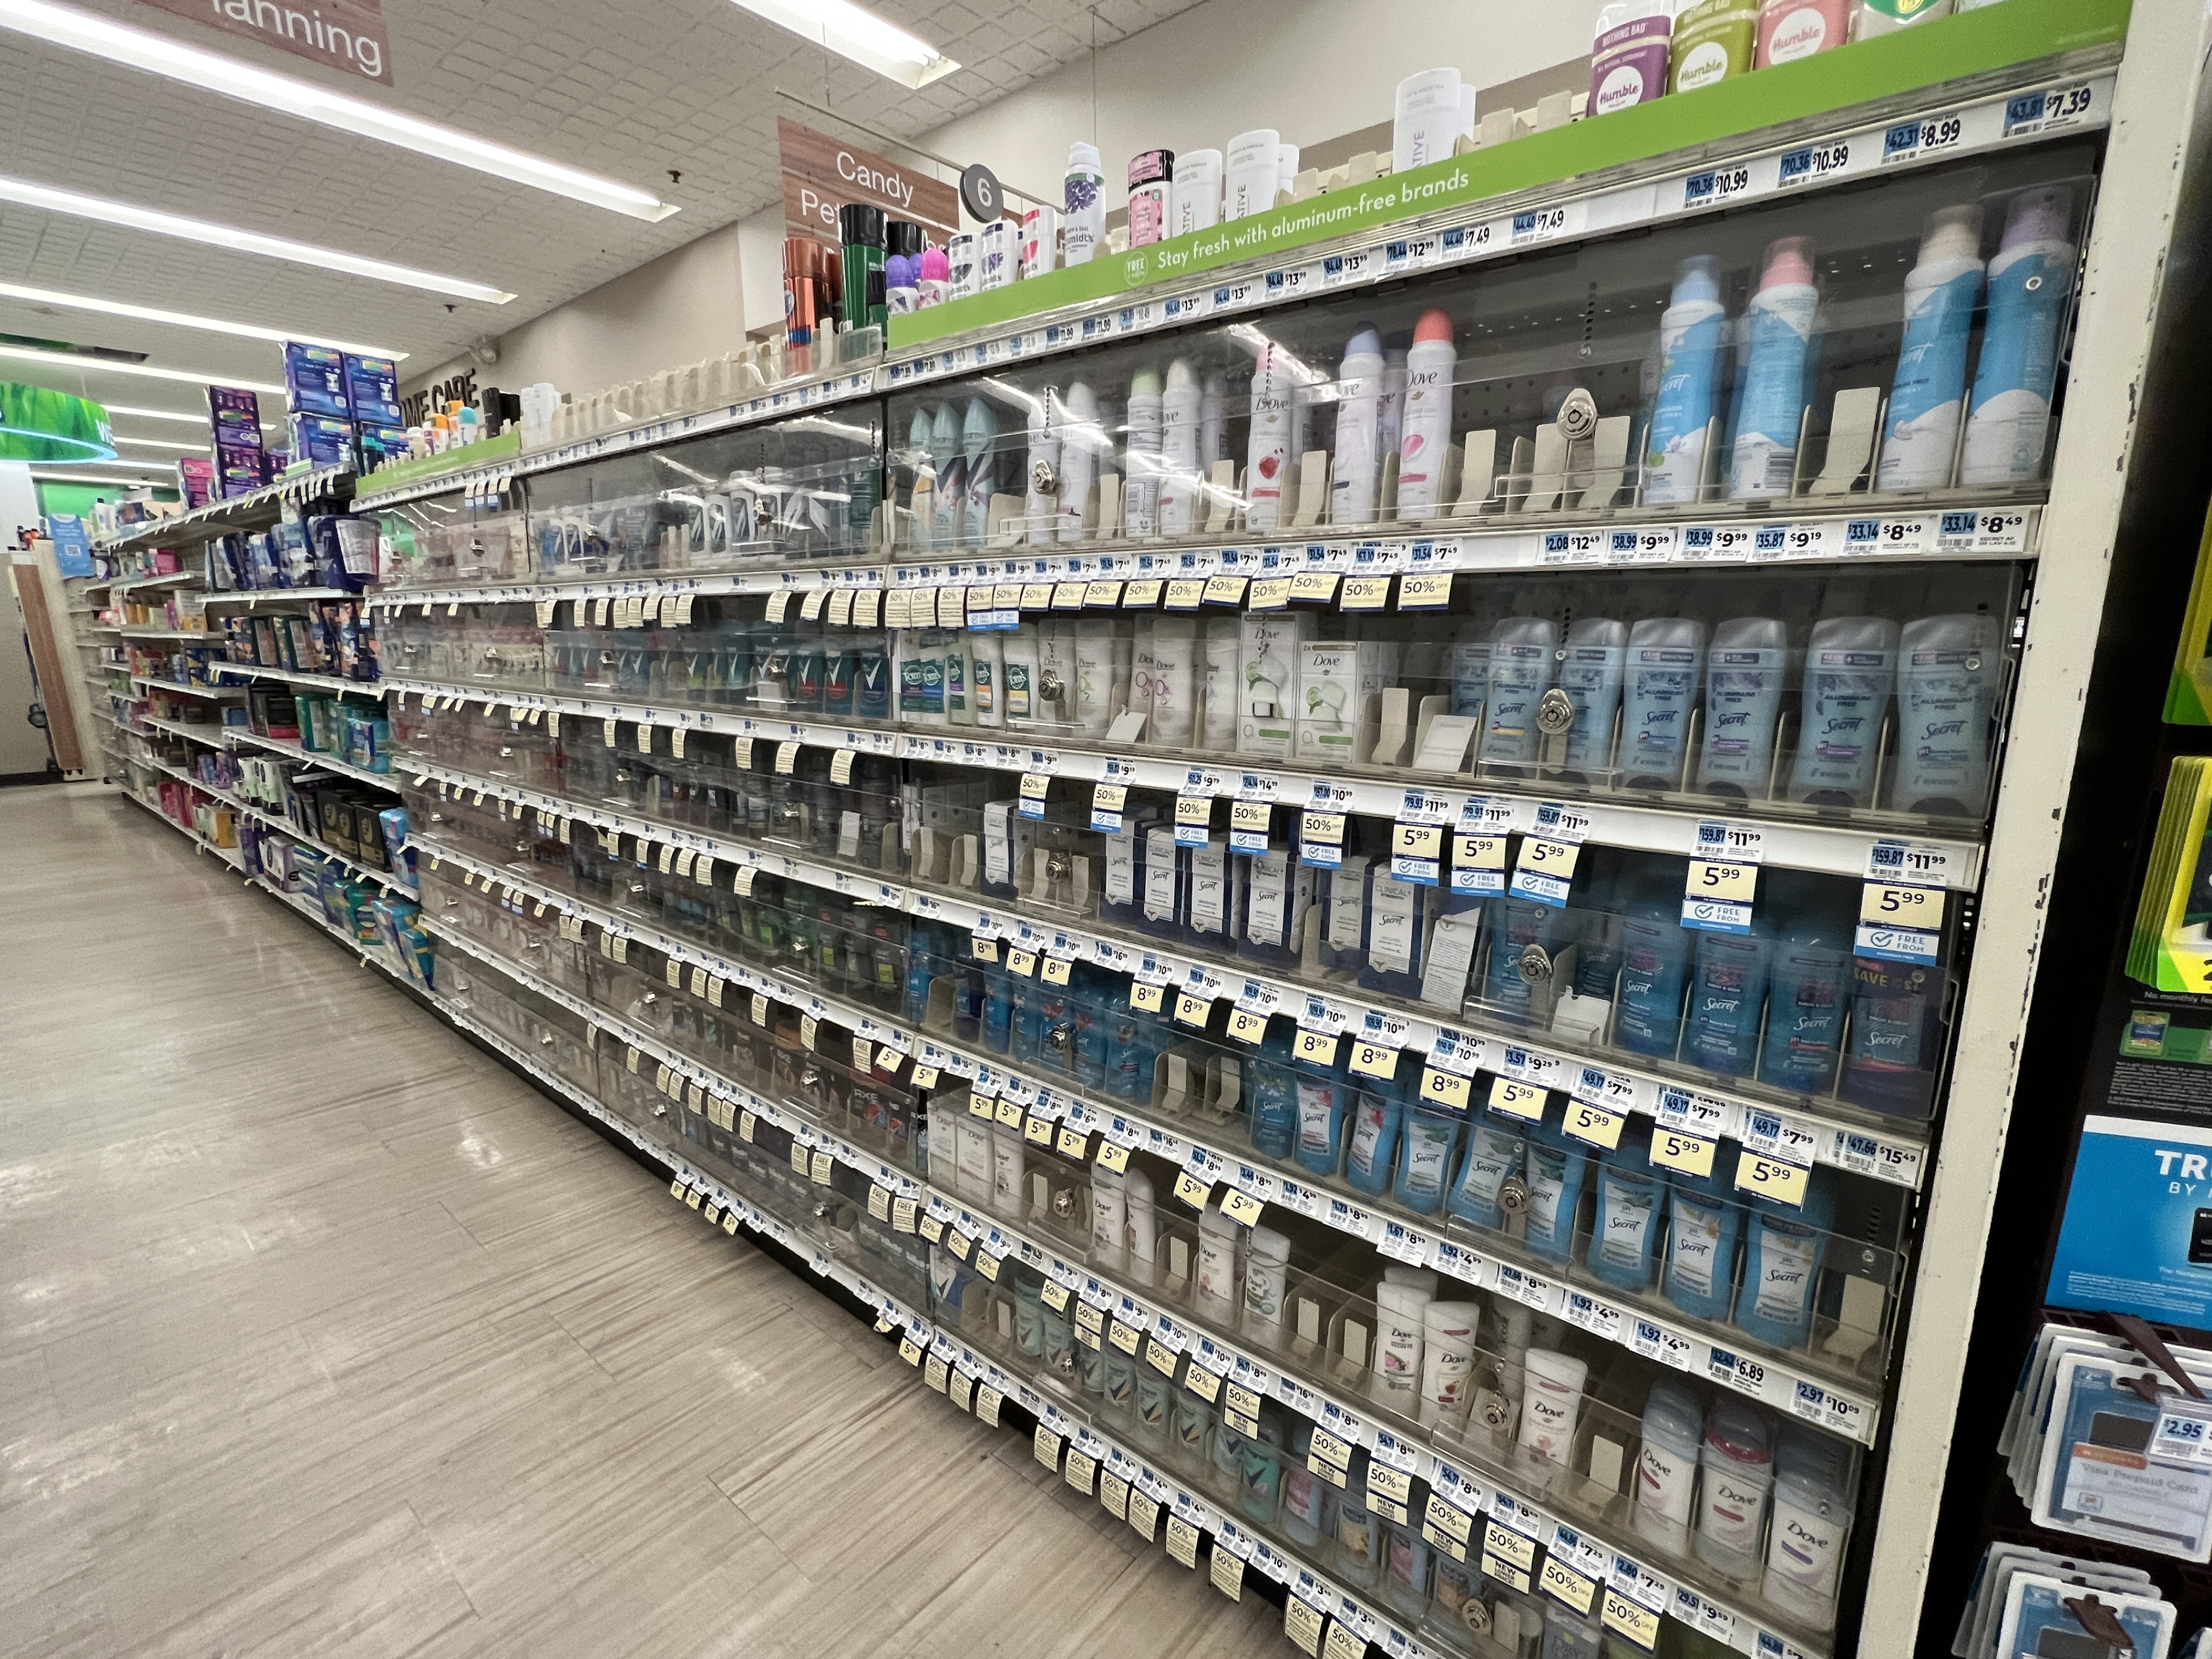 Deodorant is locked up at Rite Aid to prevent shoplifting | Upper East Site